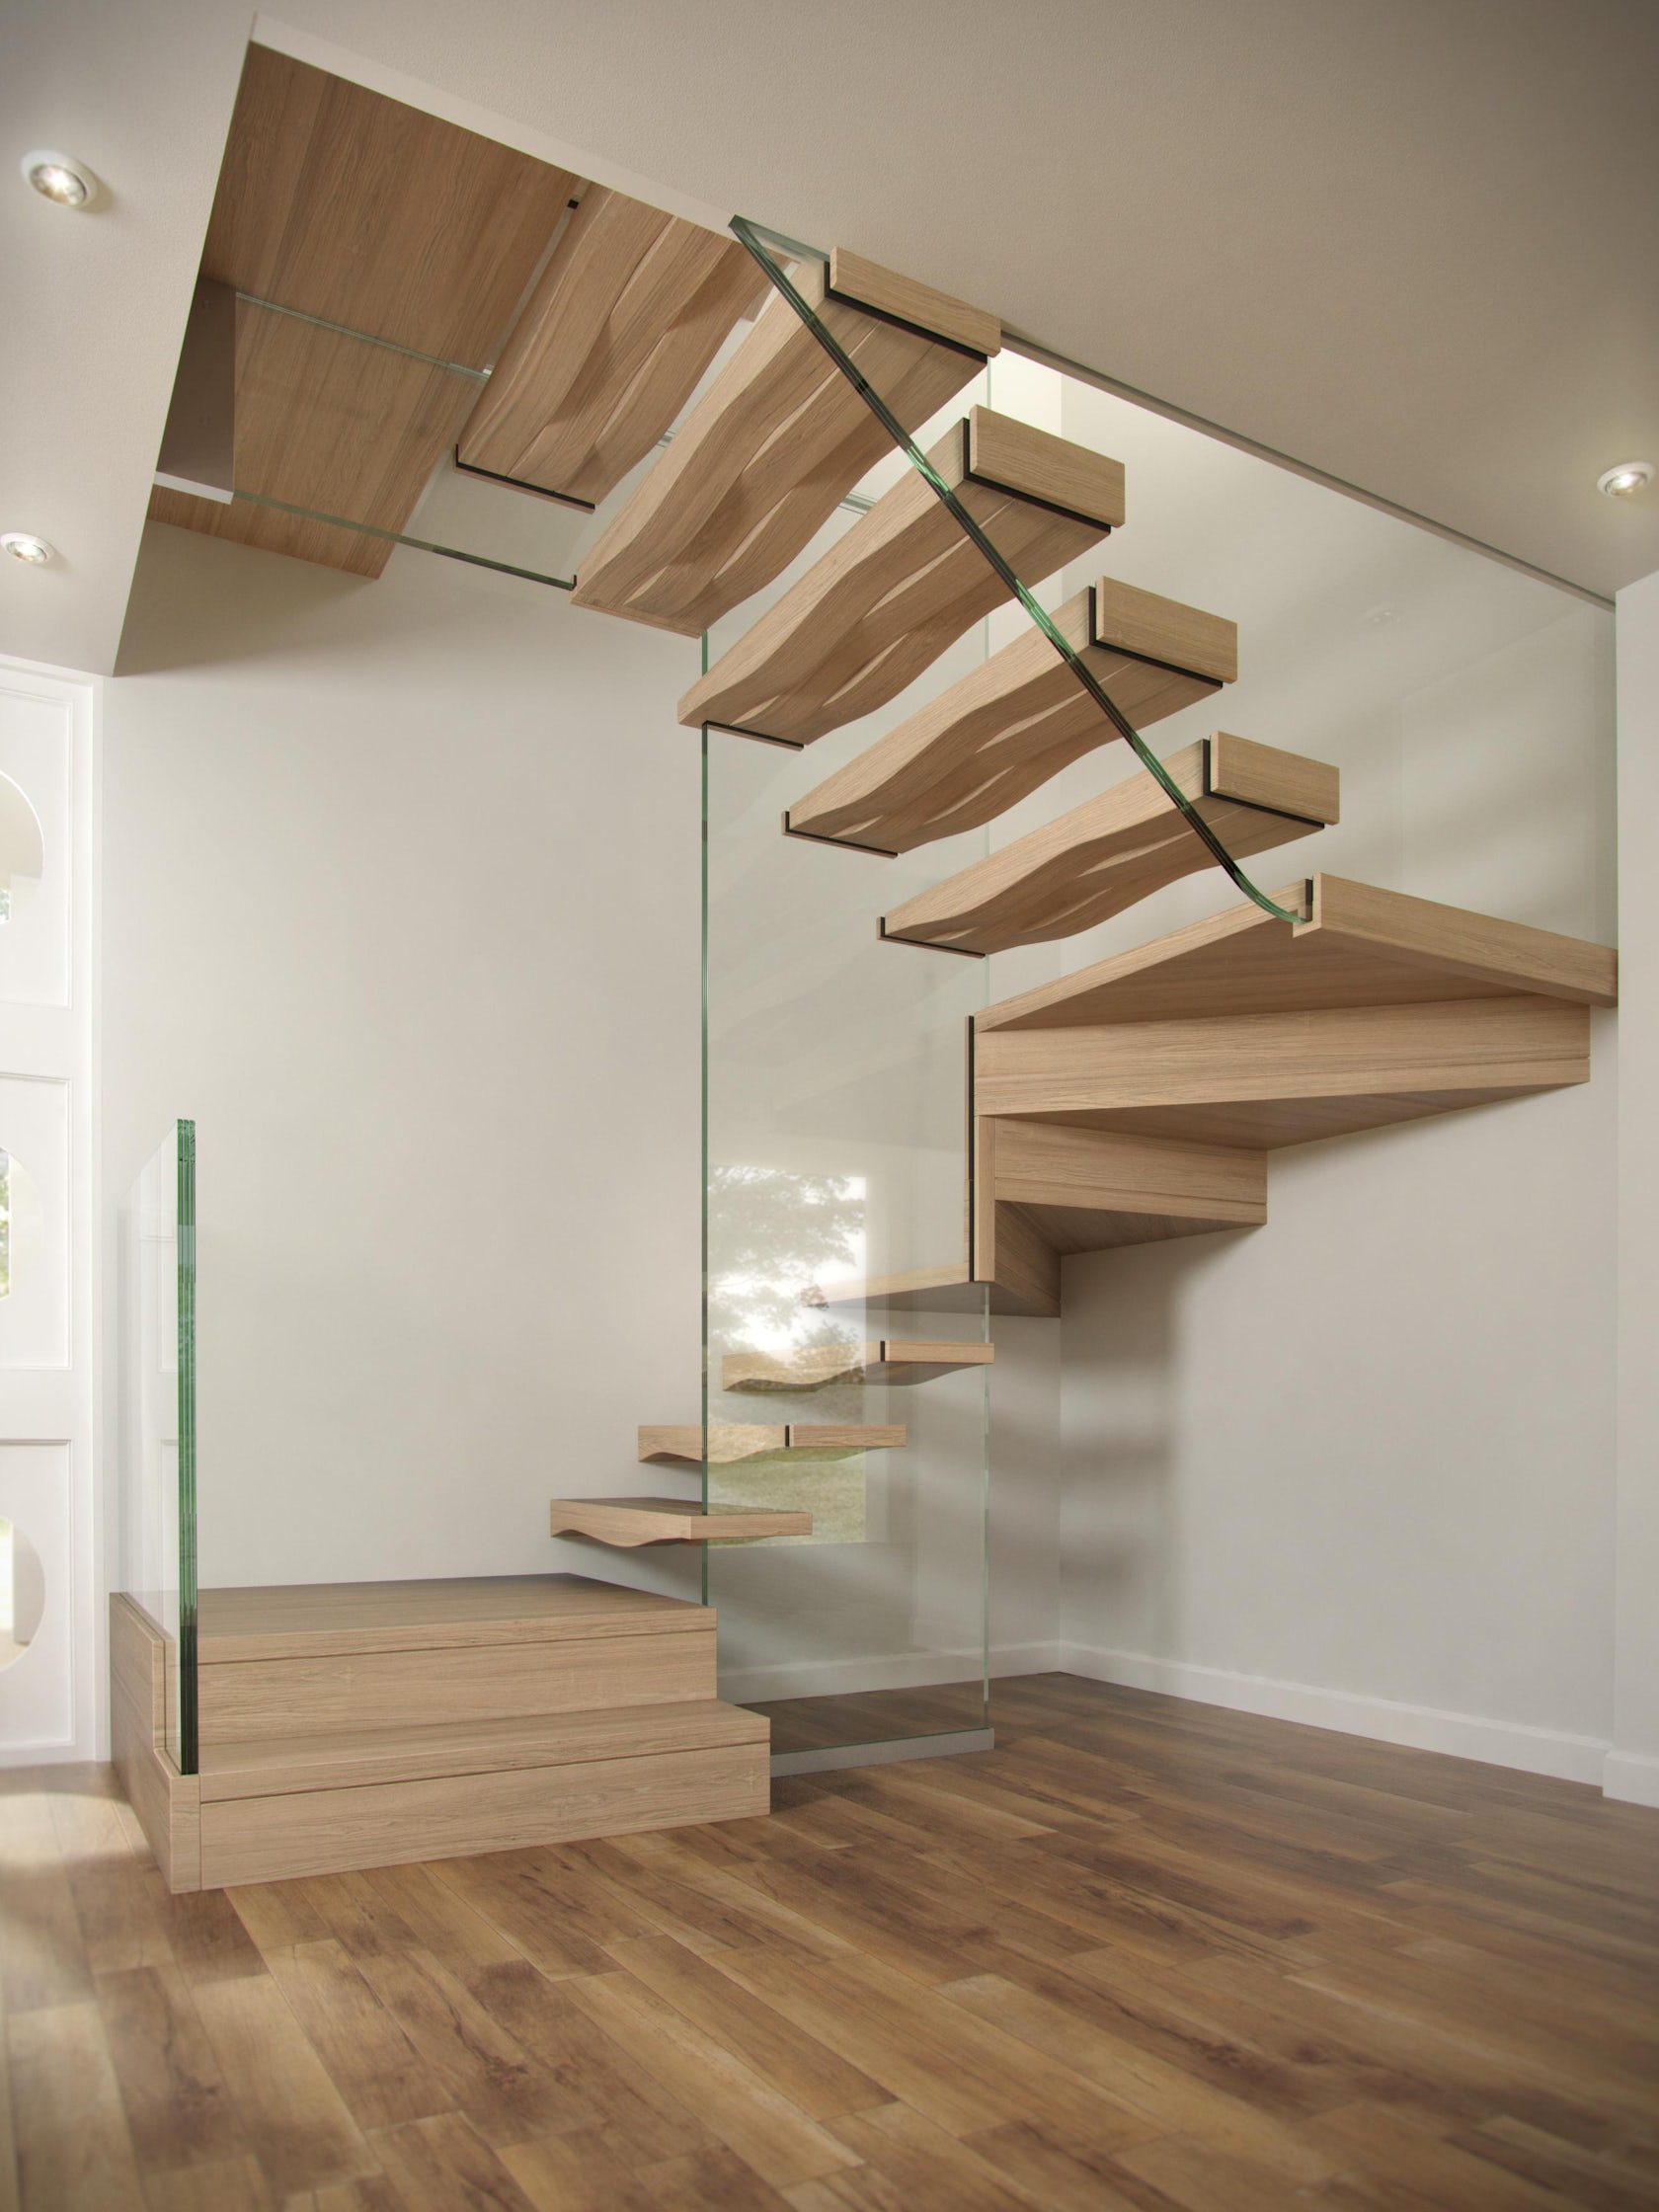 Staircase design, production and installation - Siller Stairs